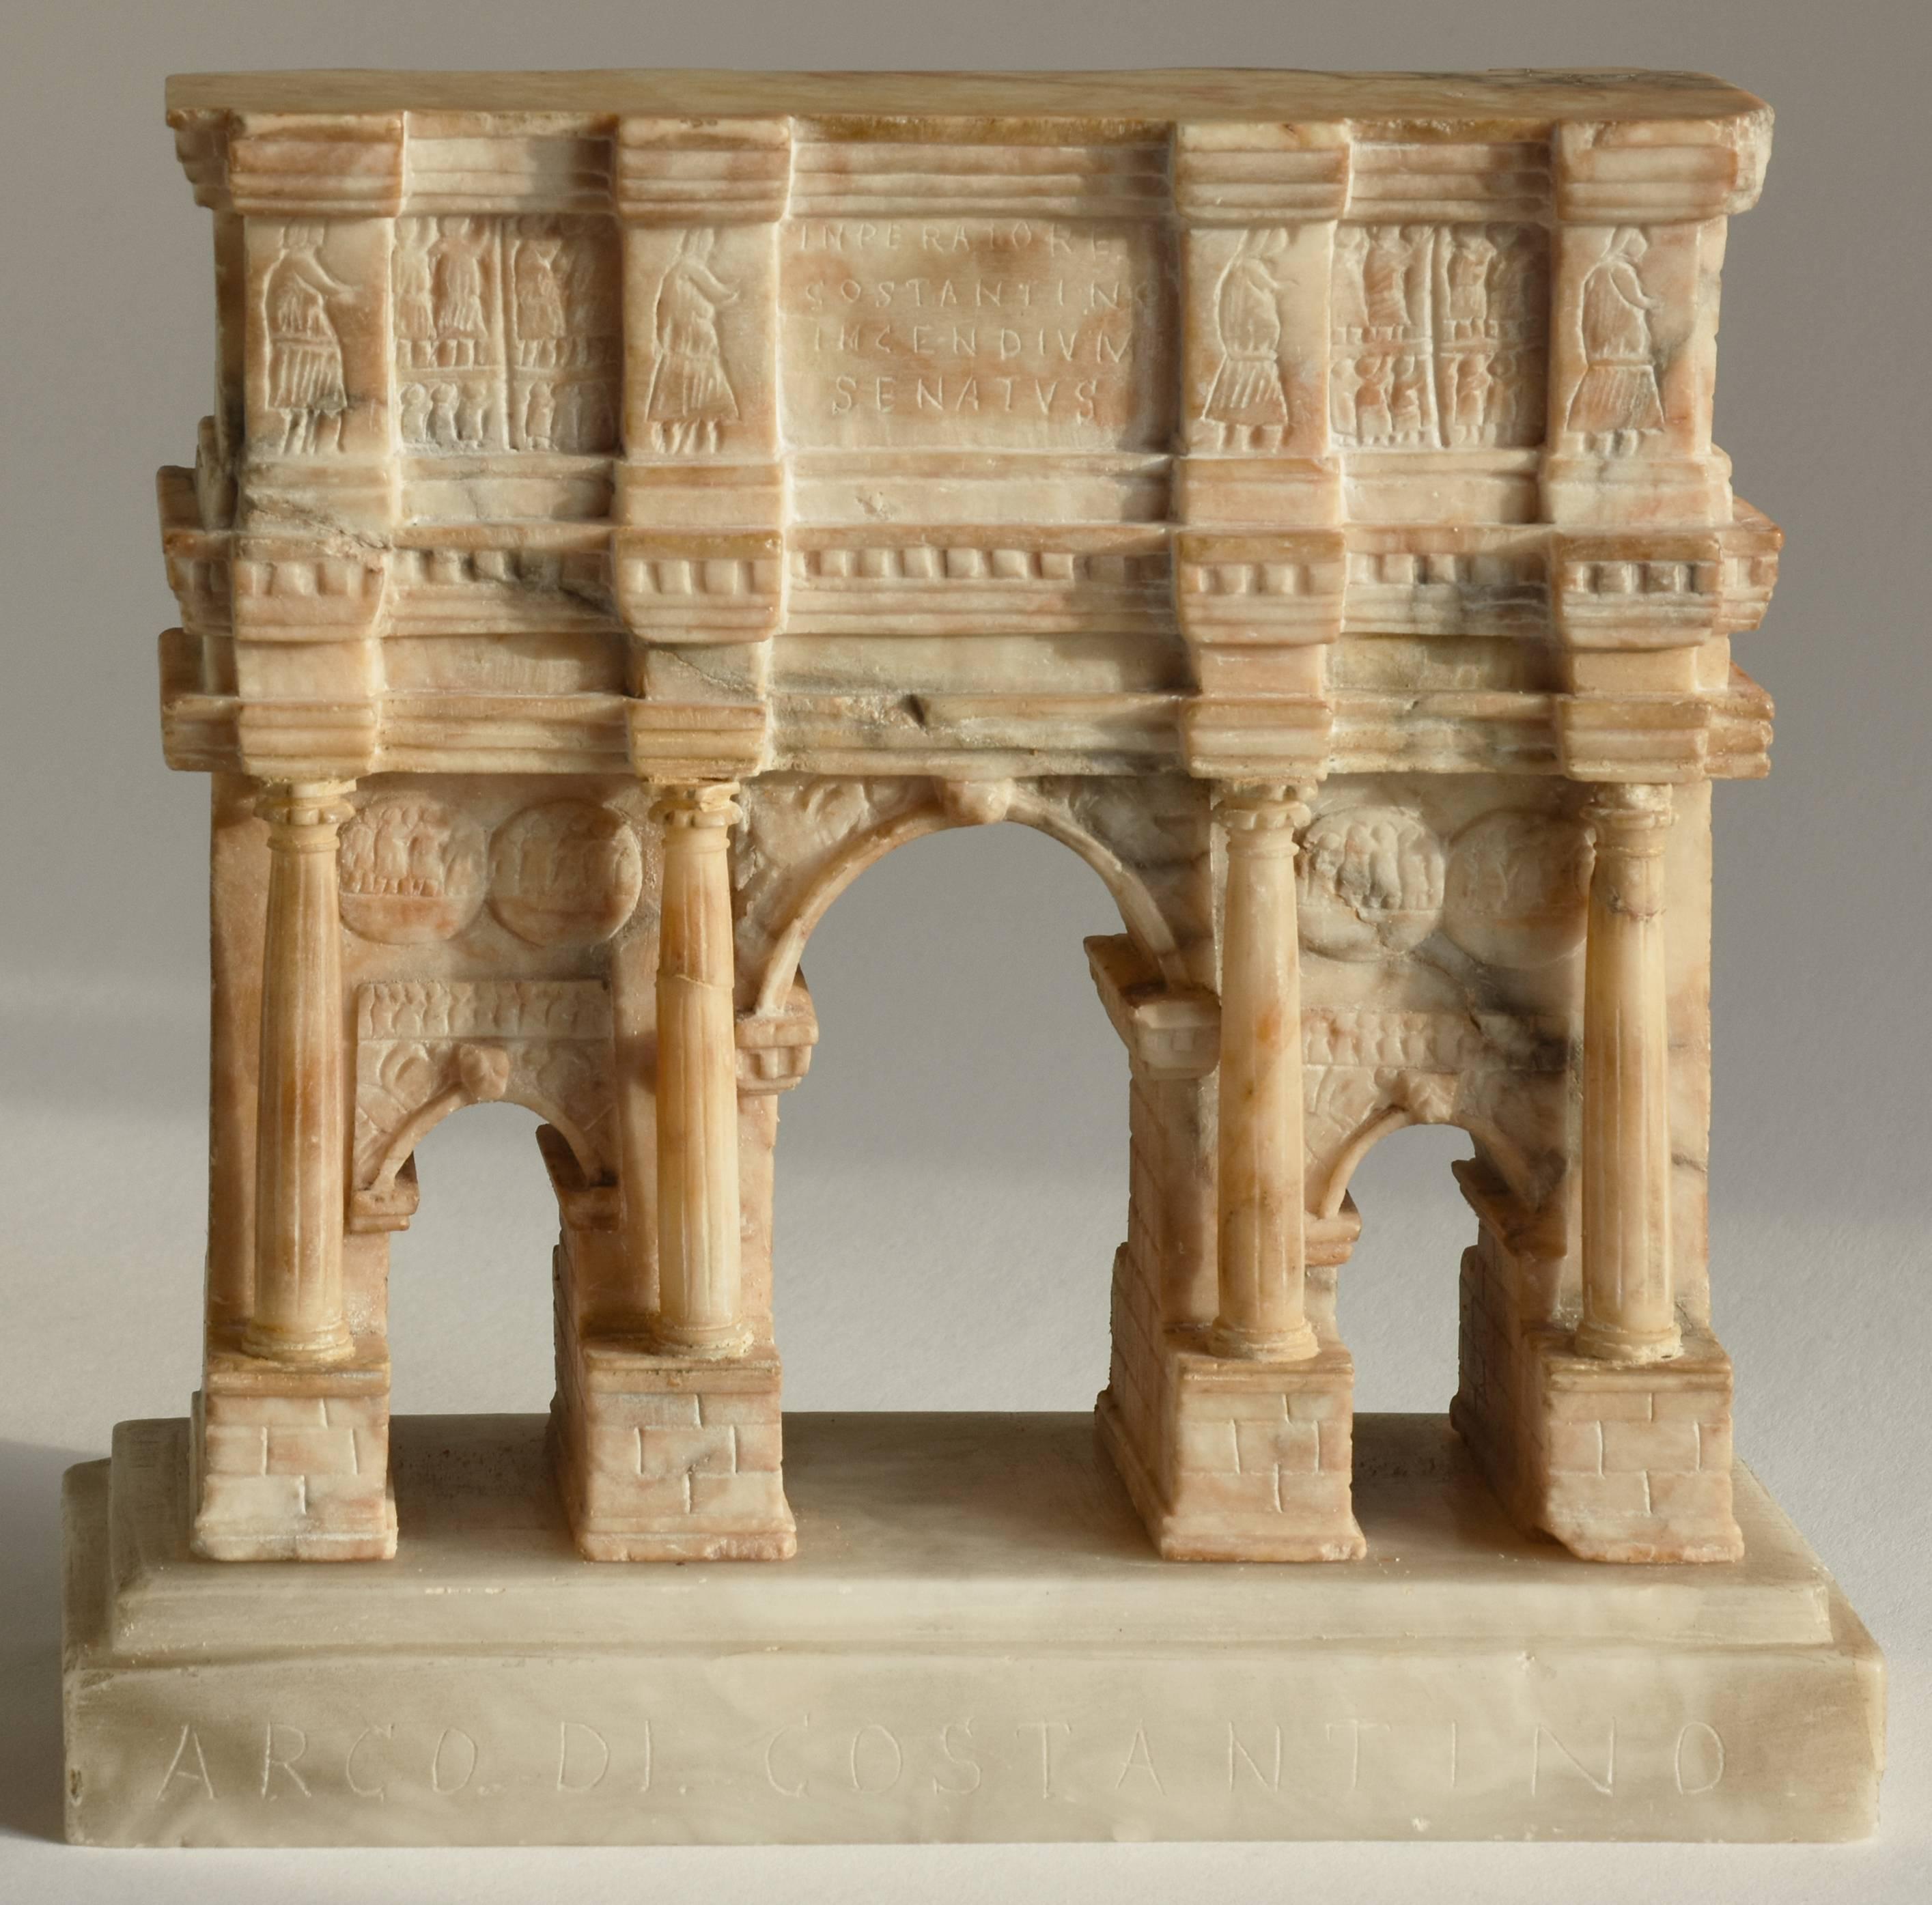 An impressive, 19th century, Grand Tour carved Alabaster architectural model of Rome’s Arch of Constantine

Interestingly, compared with other 19th century architectural souvenir models from the Eternal City, its famous arches are relatively